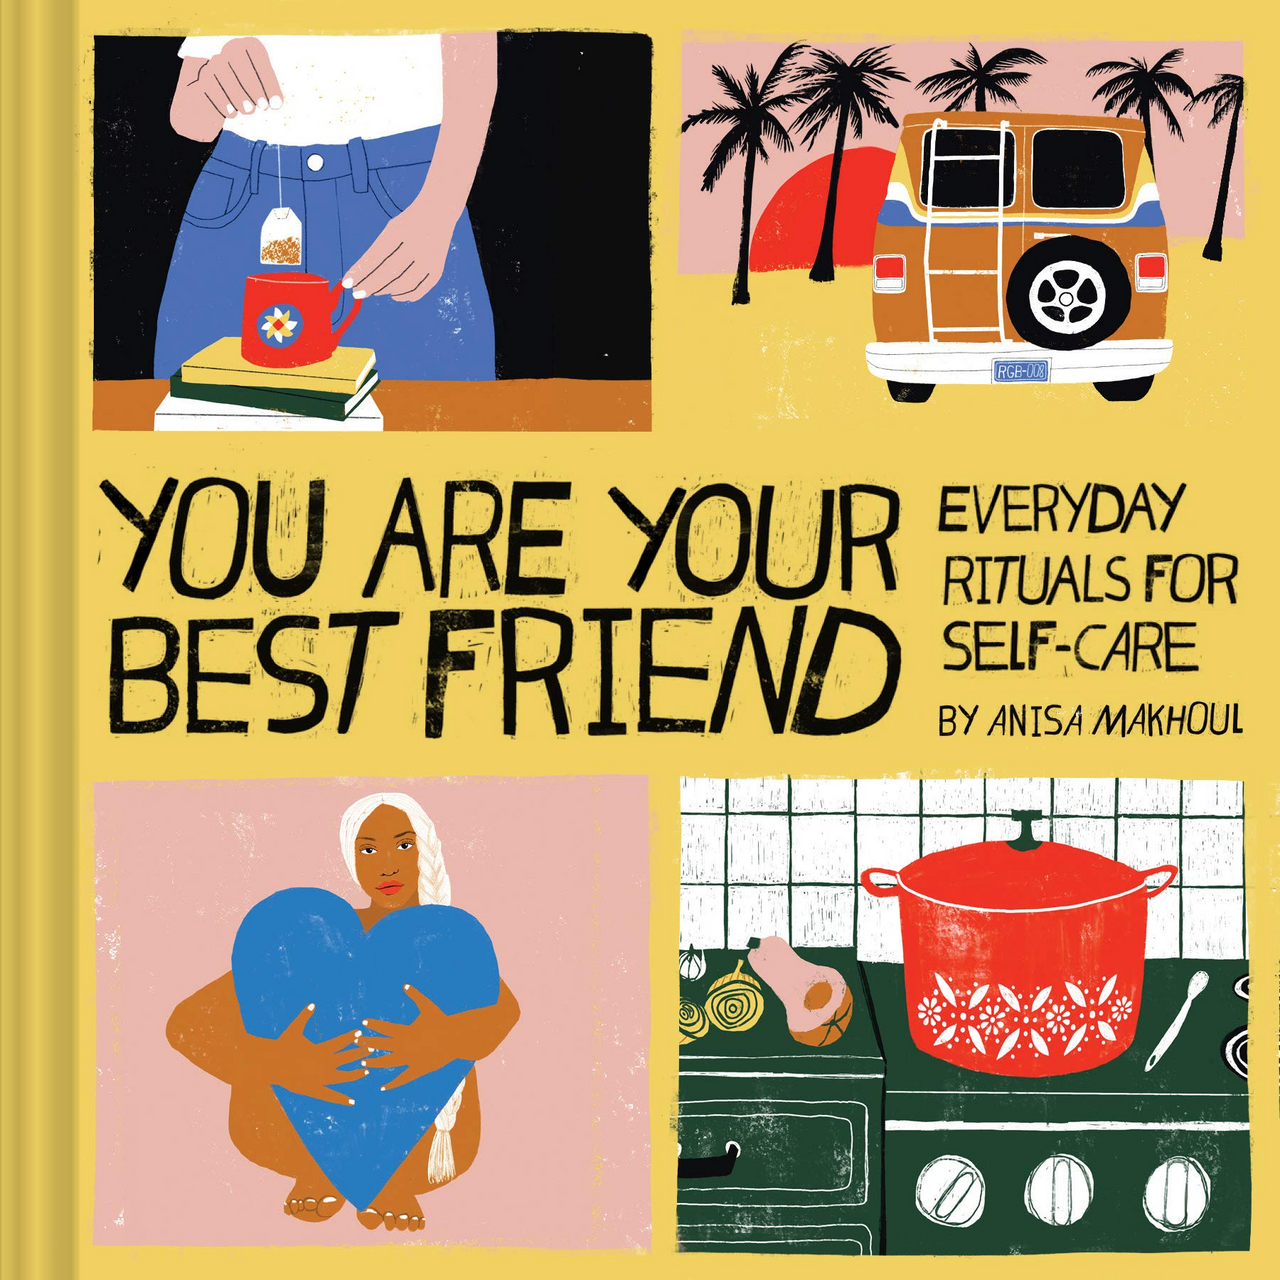 YOU ARE YOUR BEST FRIEND: EVERYDAY RITUALS FOR SELF-CARE BOOK